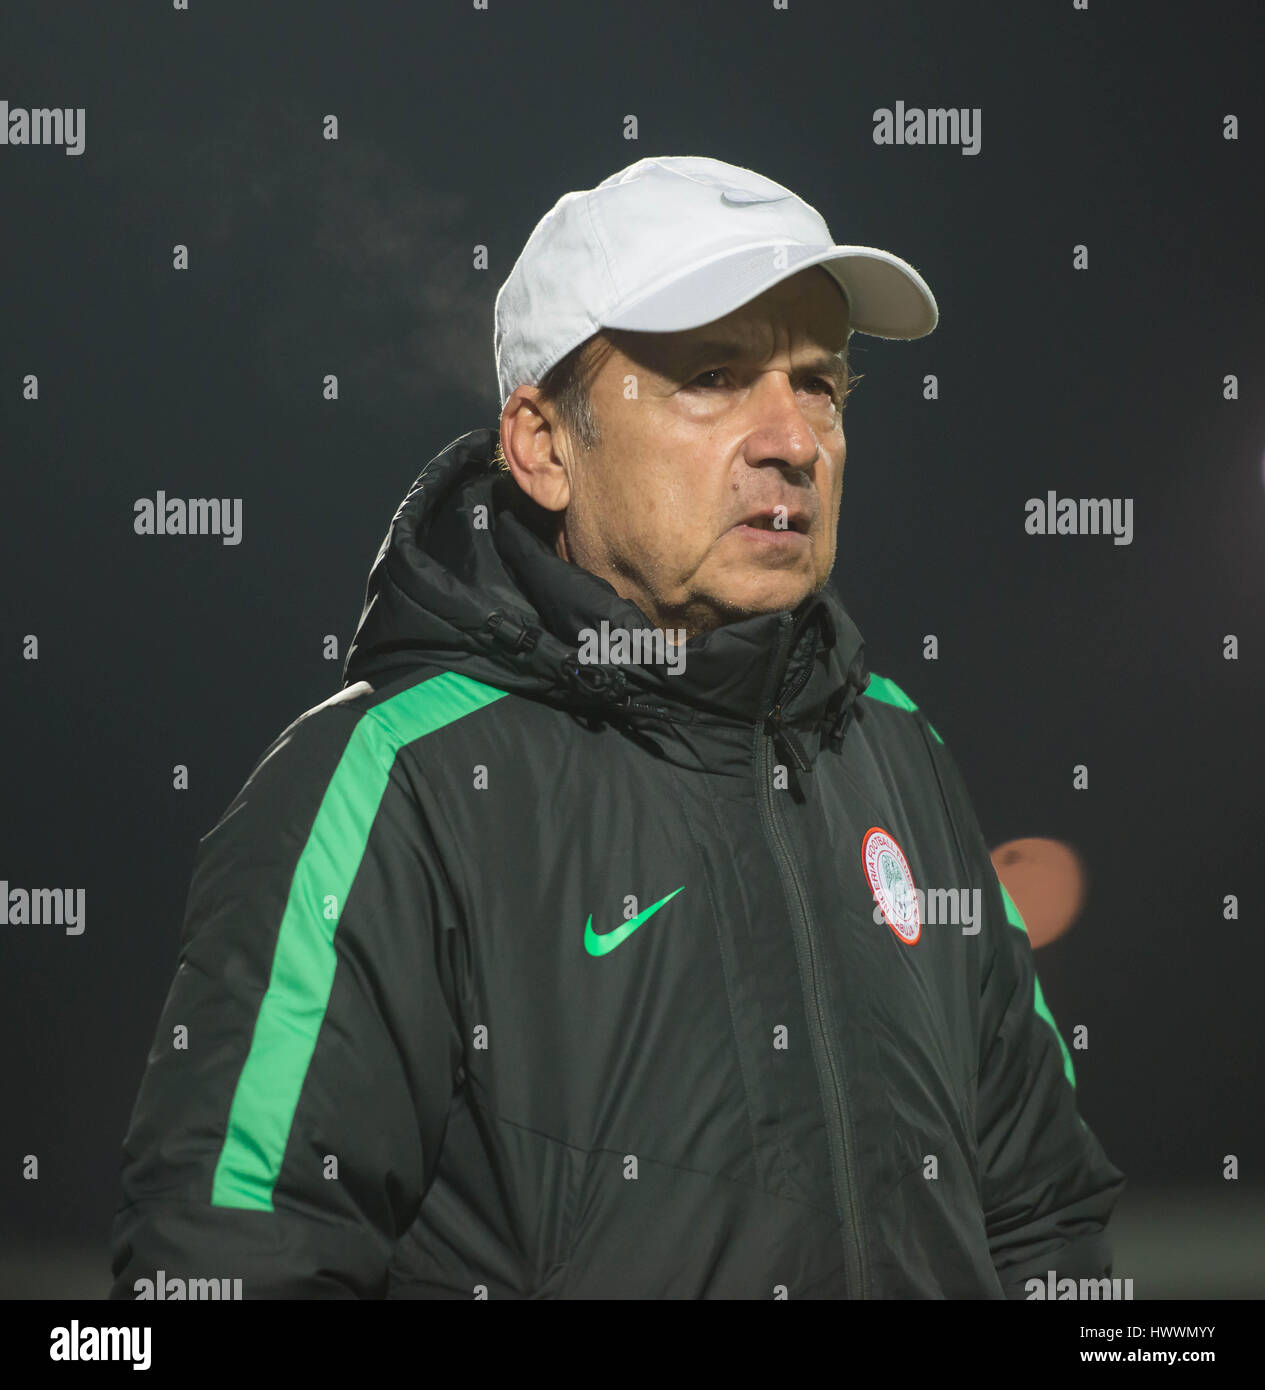 The Hive, Barnet,  England. 23rd March 2017. Nigerian Coach Gernot Rohr during the International Friendly match between Nigeria and Senegal. Michael Tubi / Alamy Live News Stock Photo